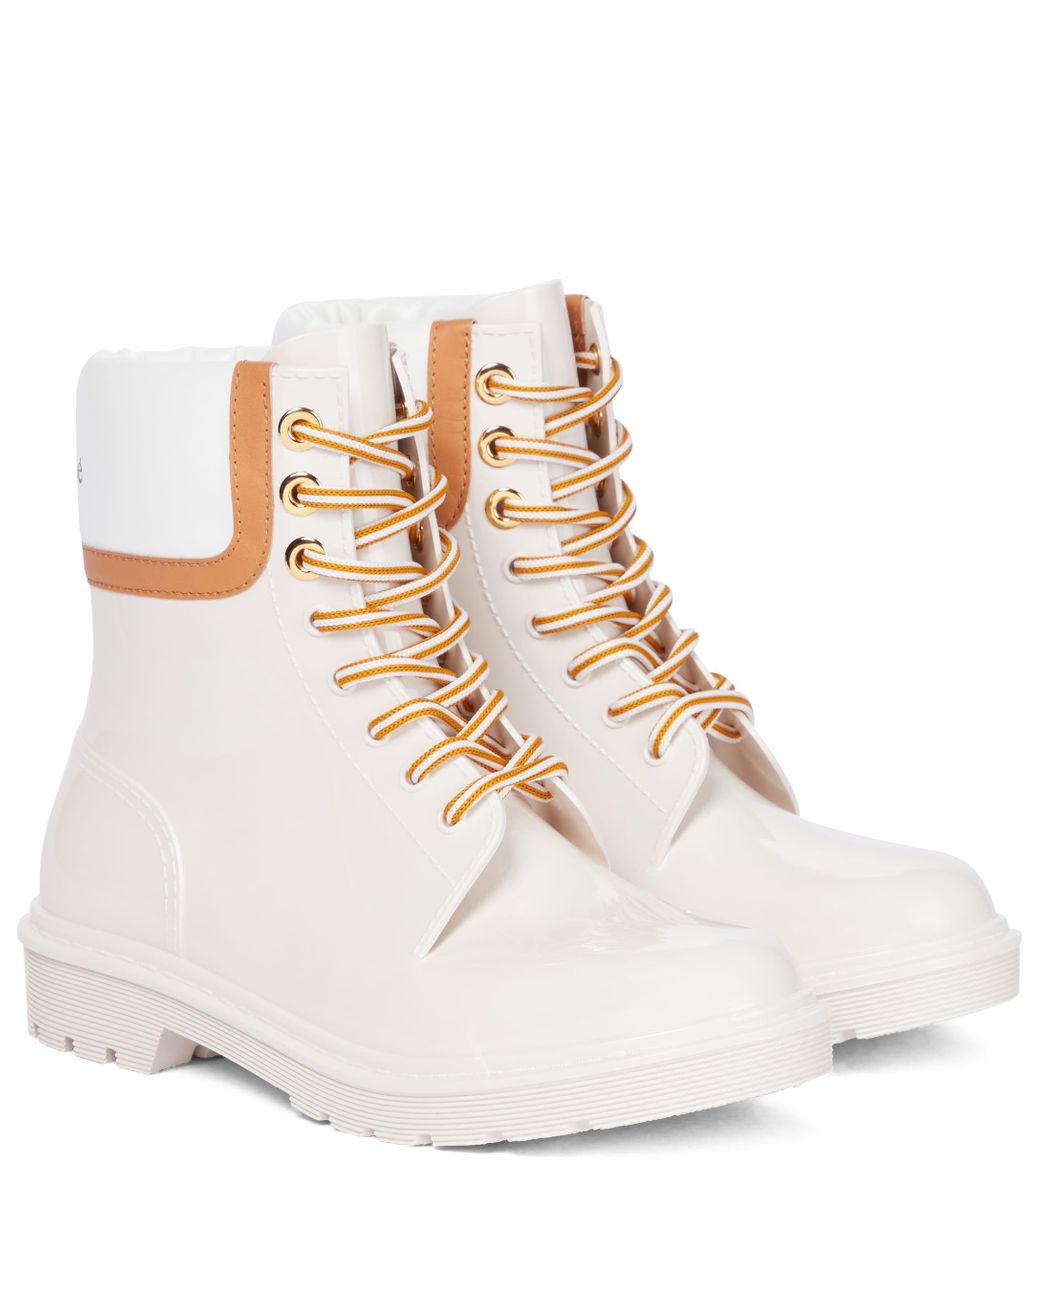 See By Chloé Florrie Rubber Combat Boots in White | Lyst Australia